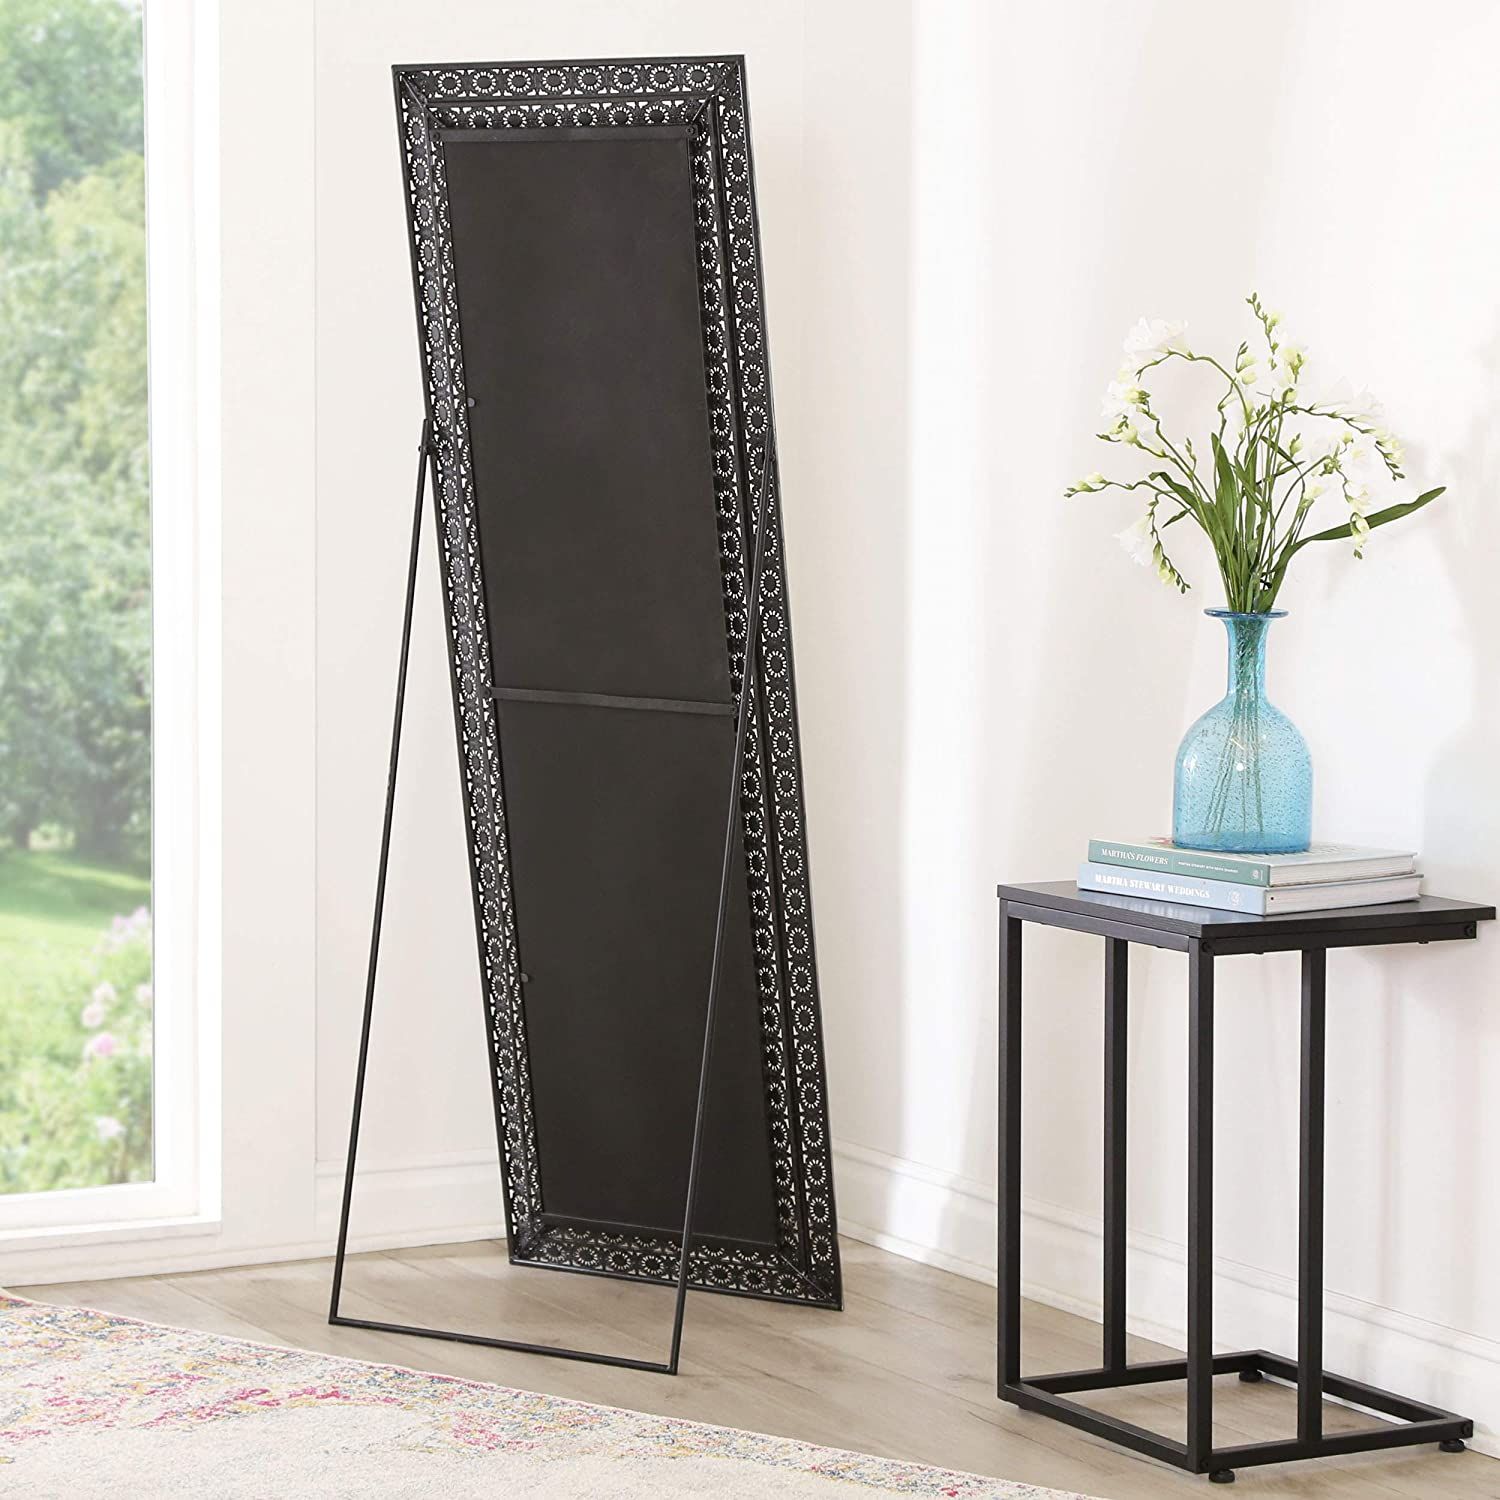 Full Length Leaning Floor Mirror With Stand And Rhinestone Accents For Full Length Floor Mirrors (View 4 of 15)